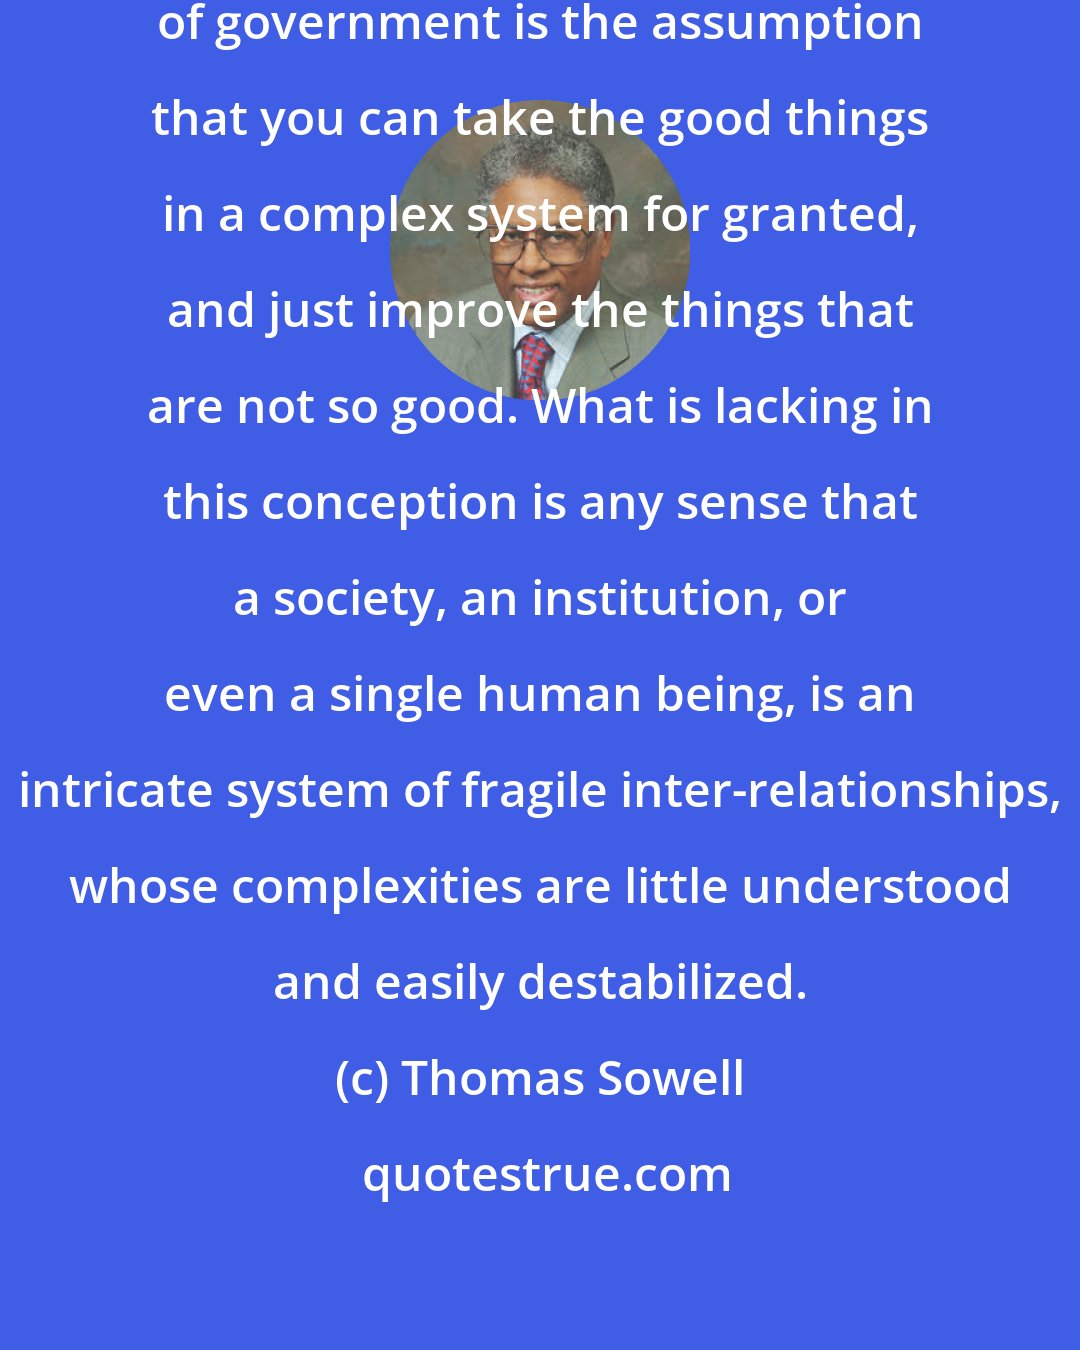 Thomas Sowell: Implicit in the activist conception of government is the assumption that you can take the good things in a complex system for granted, and just improve the things that are not so good. What is lacking in this conception is any sense that a society, an institution, or even a single human being, is an intricate system of fragile inter-relationships, whose complexities are little understood and easily destabilized.